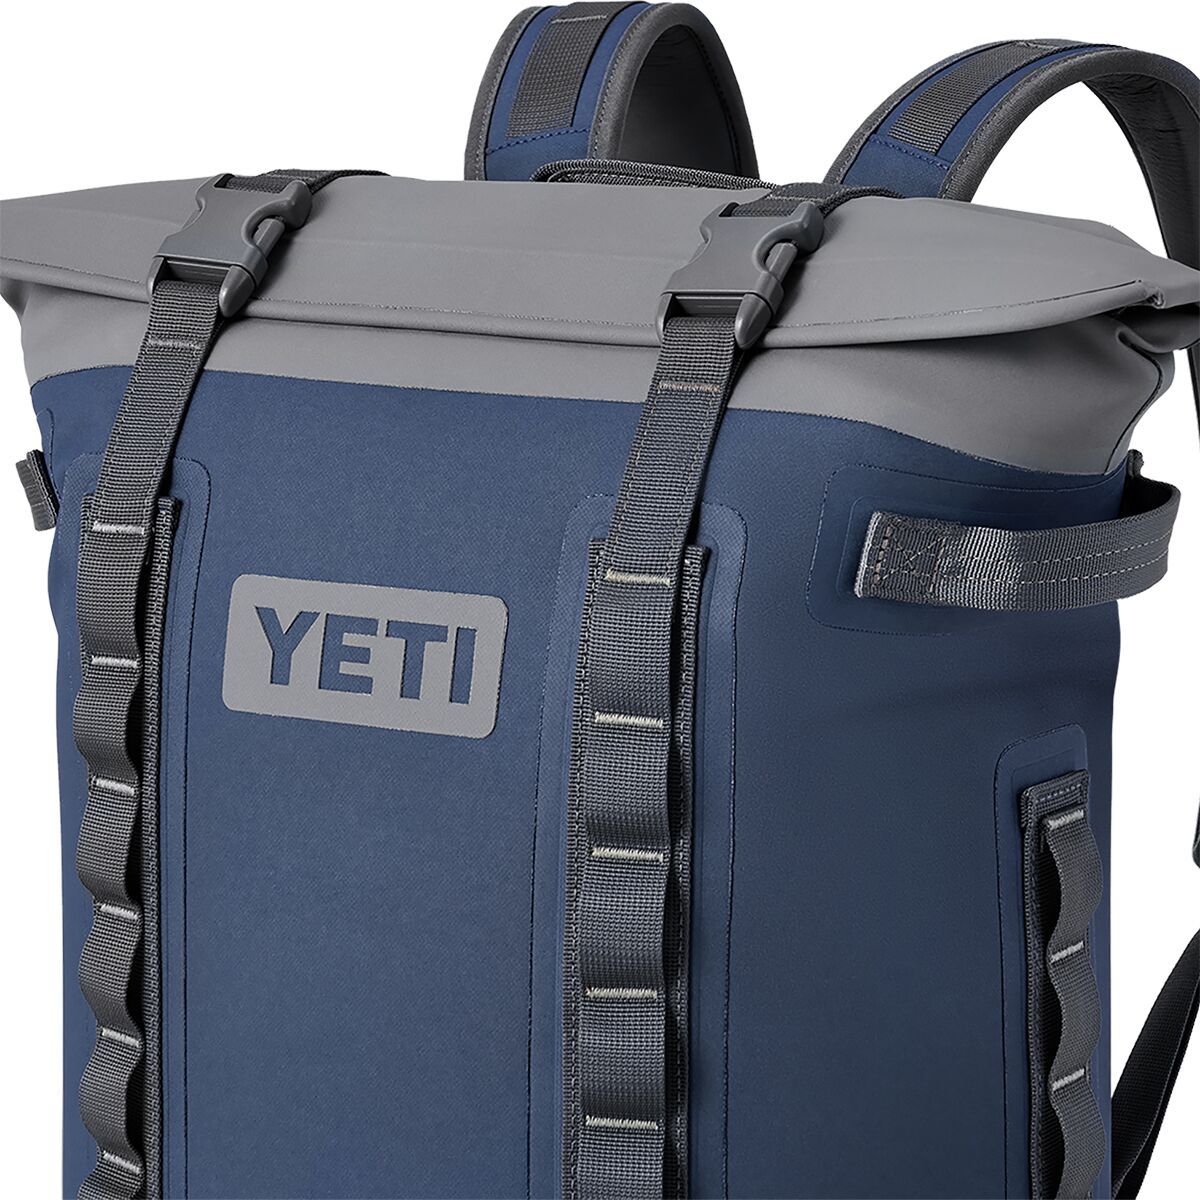 NEW W TAGS - Yeti Hopper M20 Nordic Blue Backpack Cooler-Limited